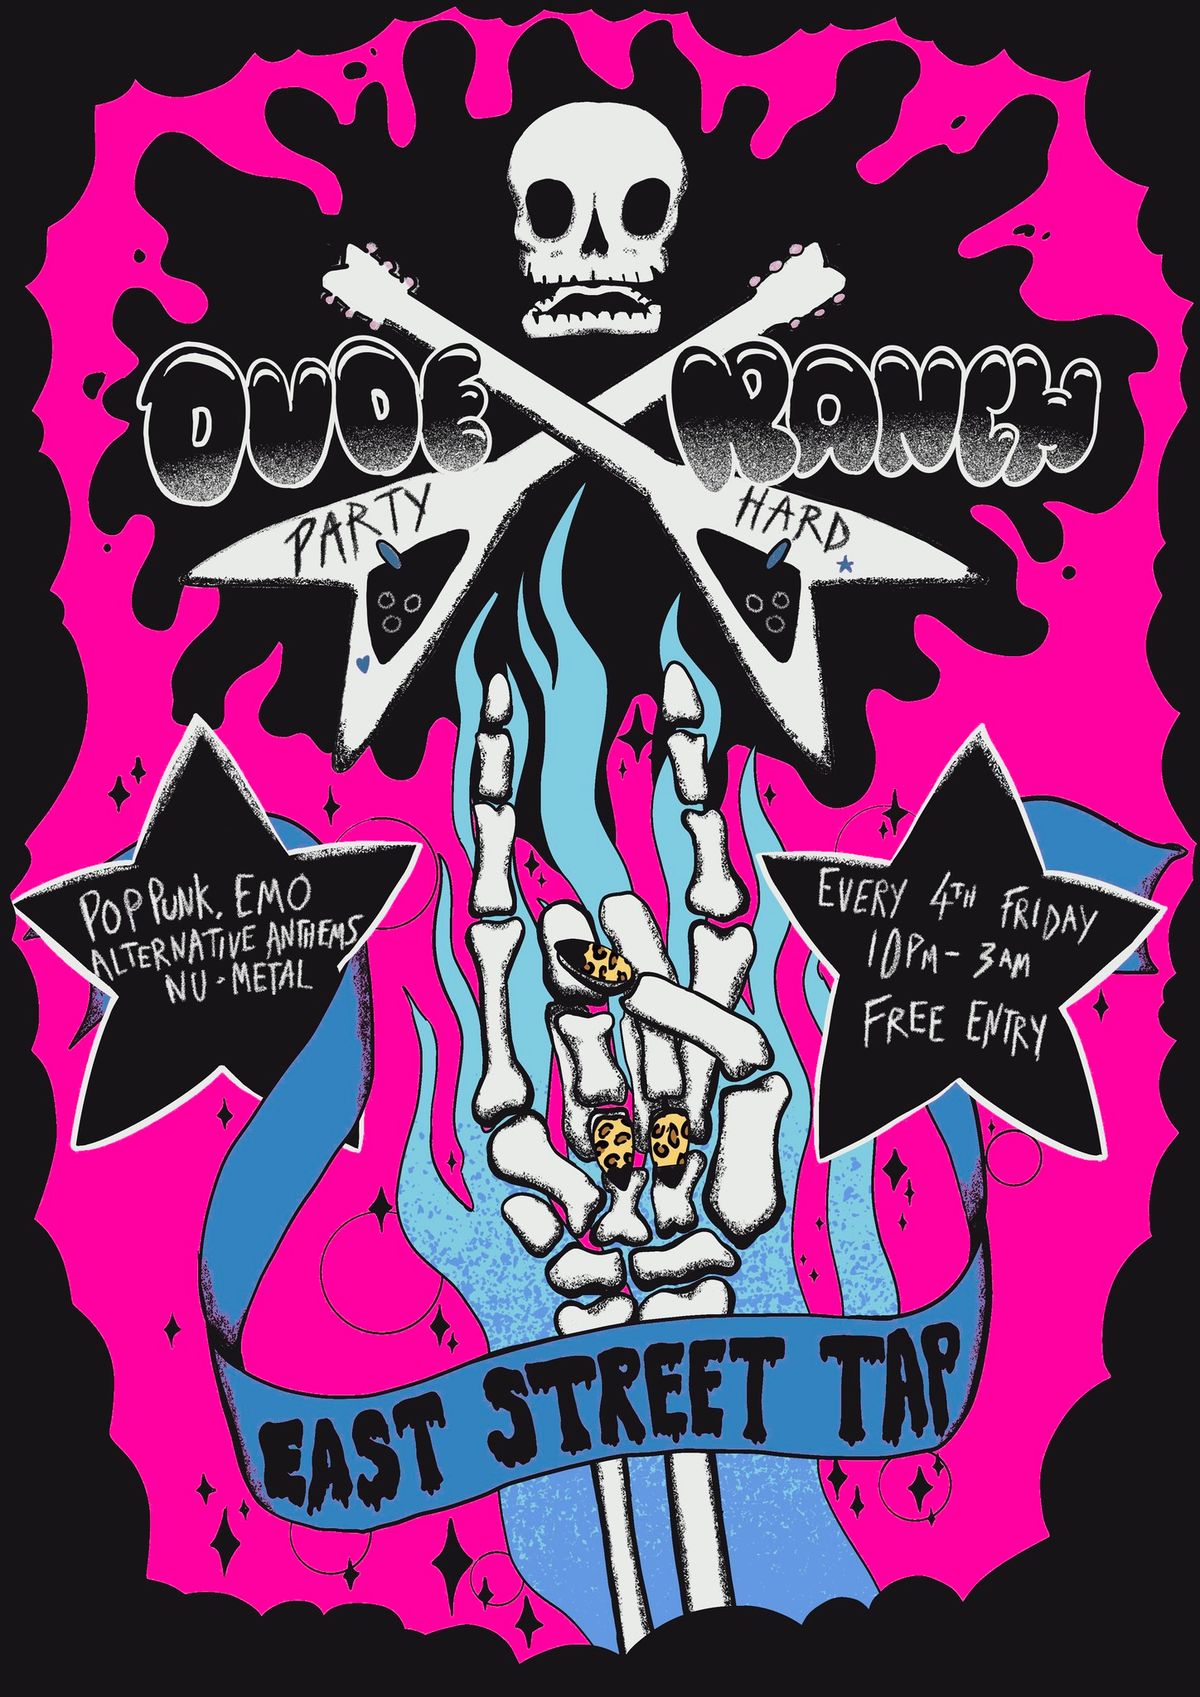 DUDE RANCH \\m\/ FRIDAY MAY 24TH AT EAST STREET TAP 